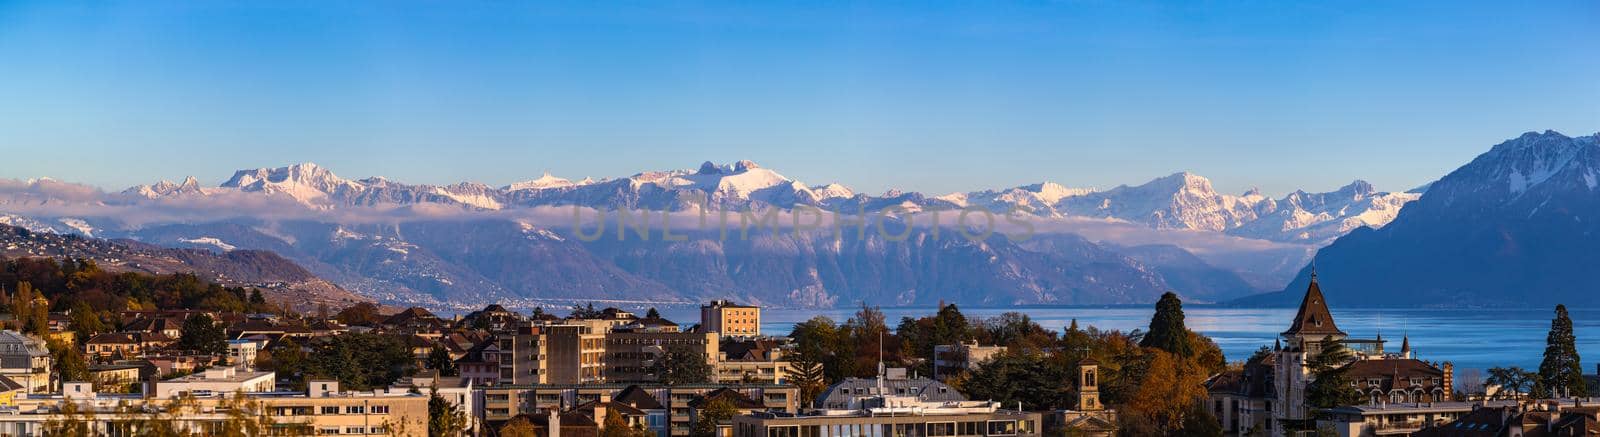 Stunning aerial panorama view of Lausanne cityscape with Lake Geneva (Lake Leman) and snow convered French Alps in background on a sunny autumn day with blue sky cloud, Canton of Vaud, Switzerland by VogelSP